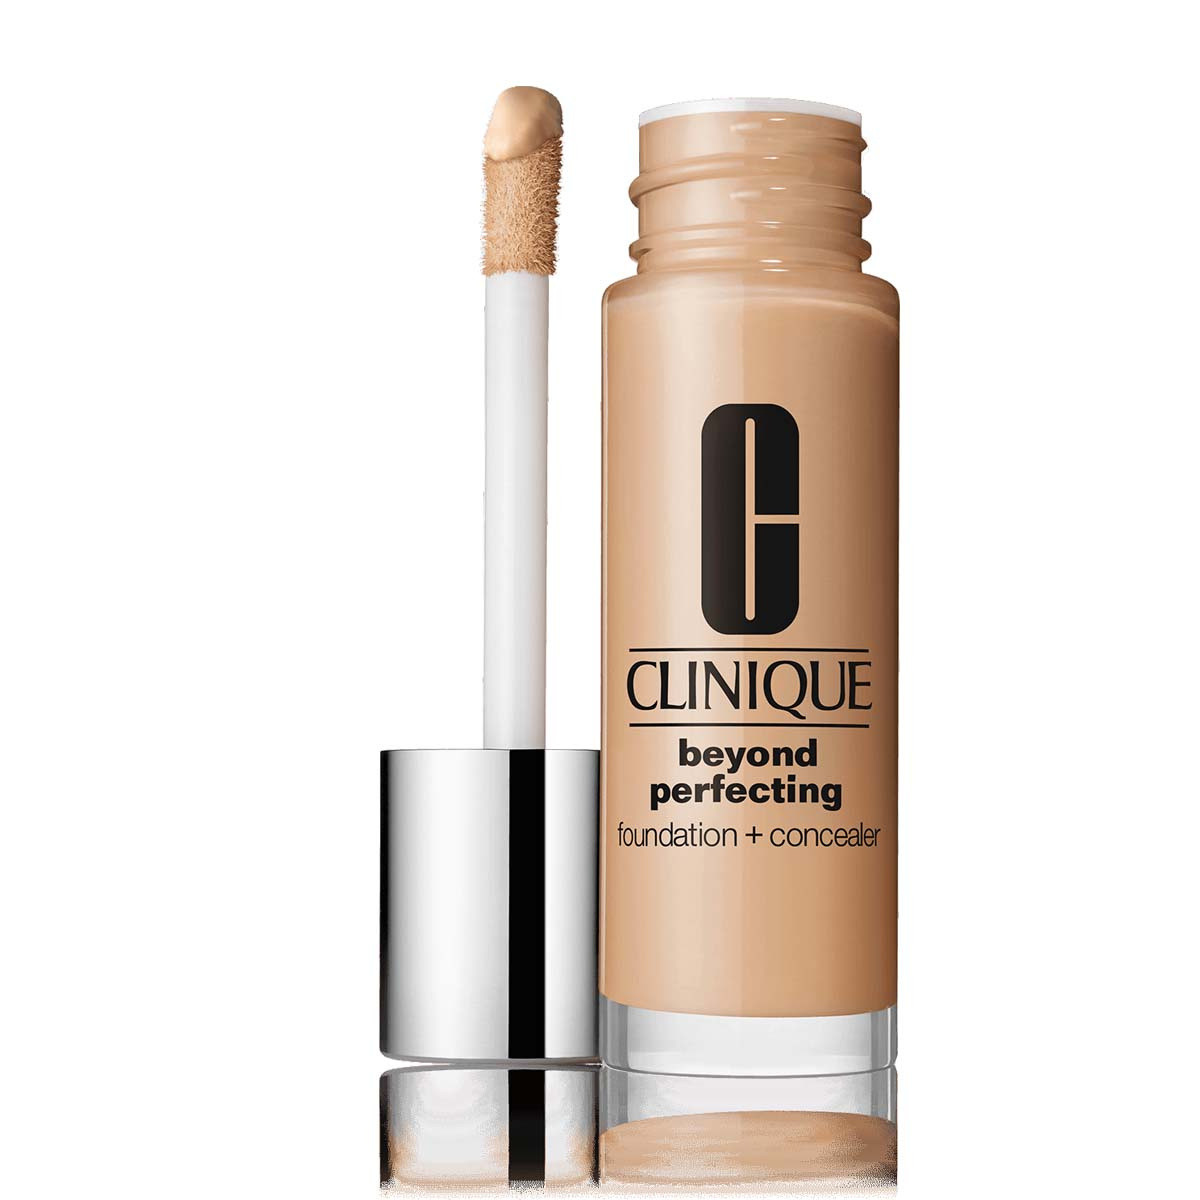 Clinique beyond perfecting foundation - cn 52 neutral  30 ml, CN 52 NEUTRAL, large image number 0